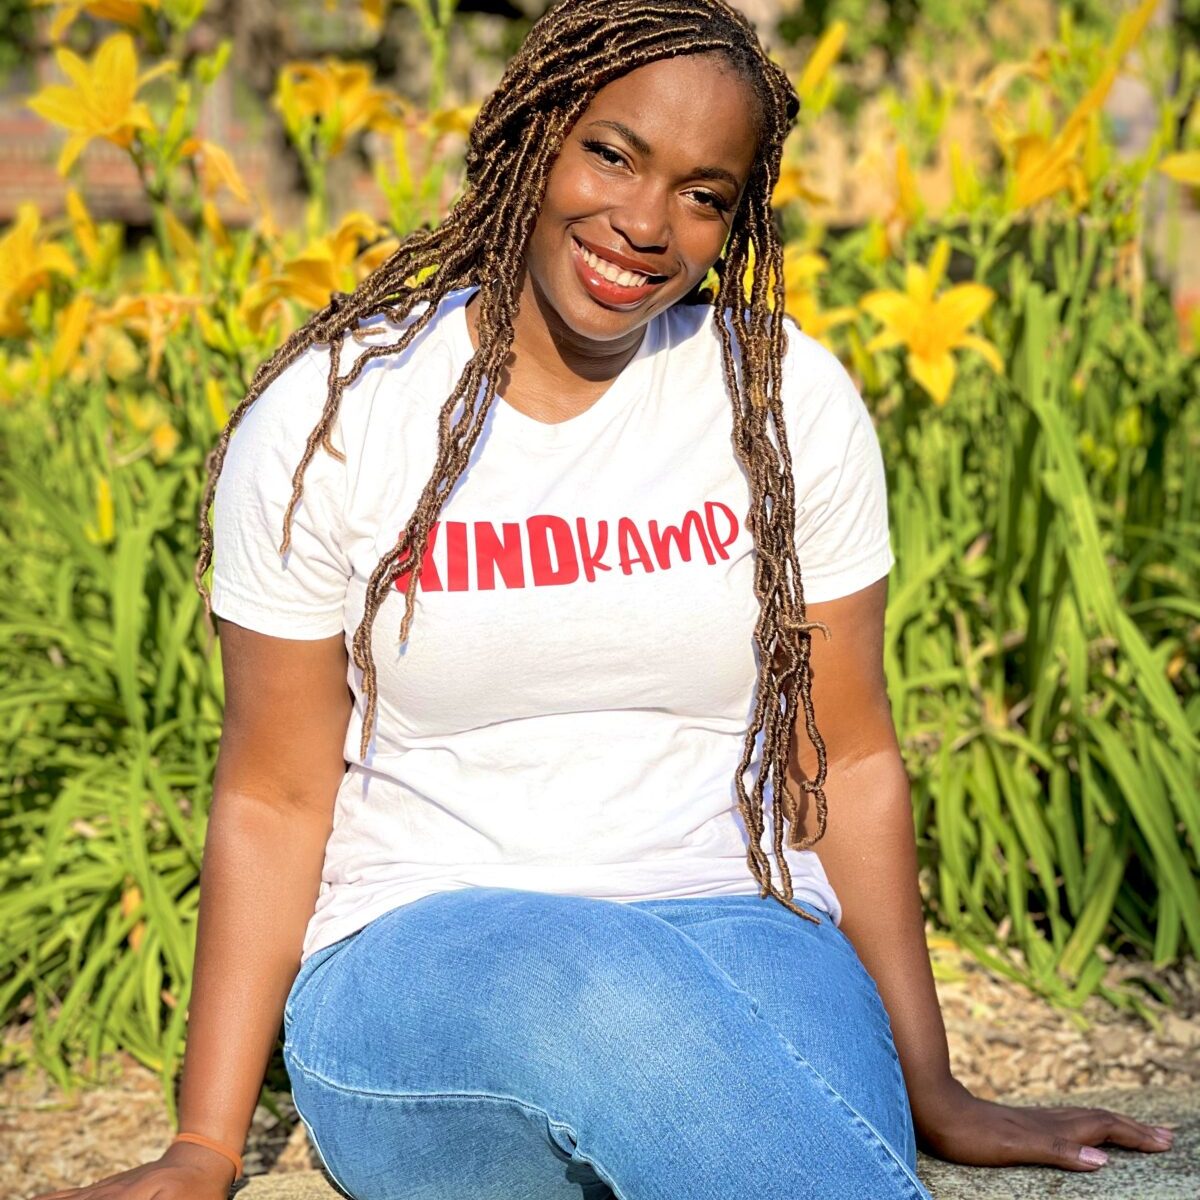 Brittany McDaniel, President and Founder of KINDkamp